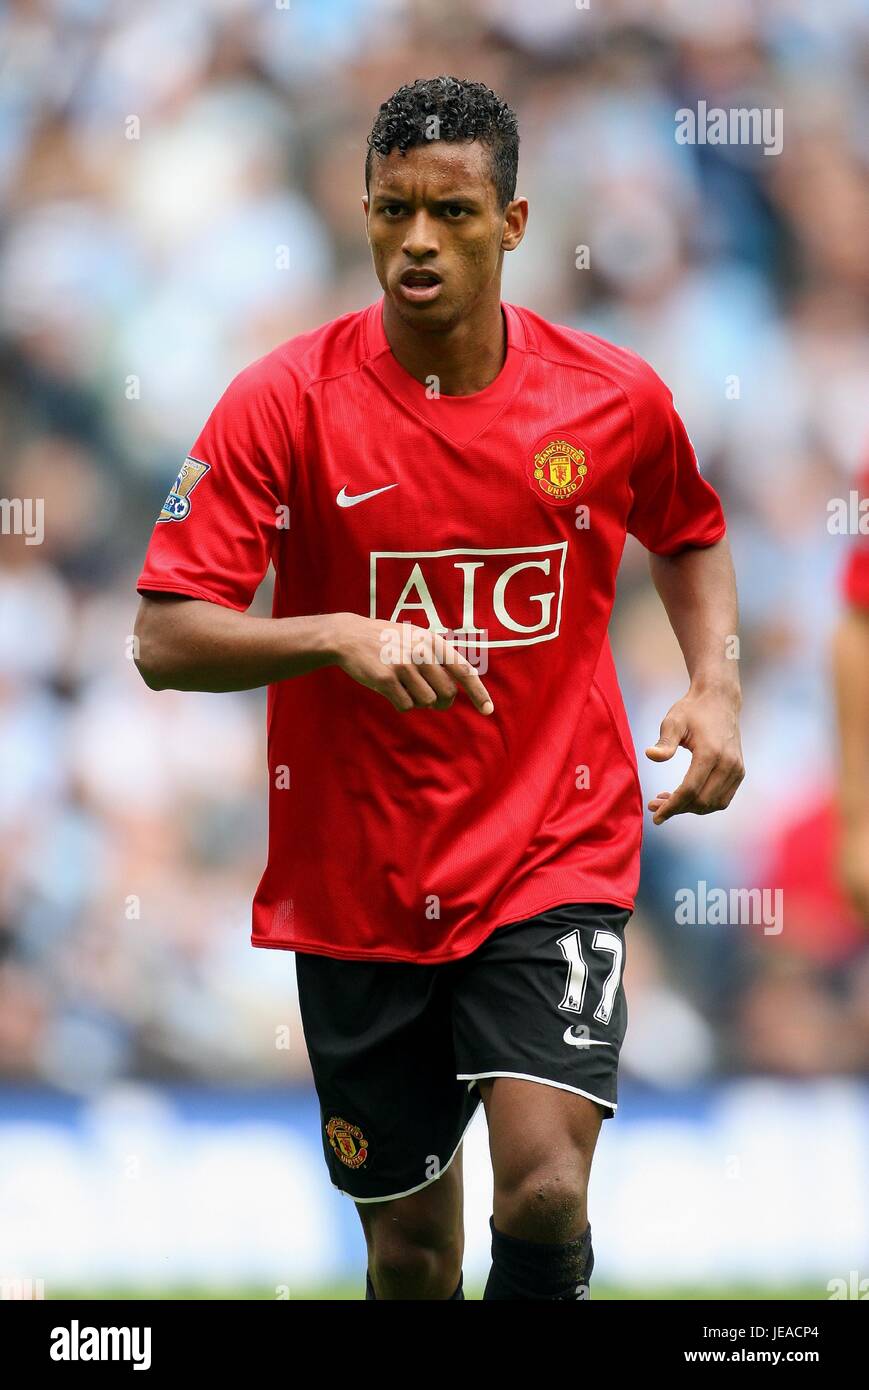 LUIS NANI MANCHESTER UNITED FC CITY OF MANCHESTER STADIUM MANCHESTER ENGLAND 19 August 2007 Stock Photo